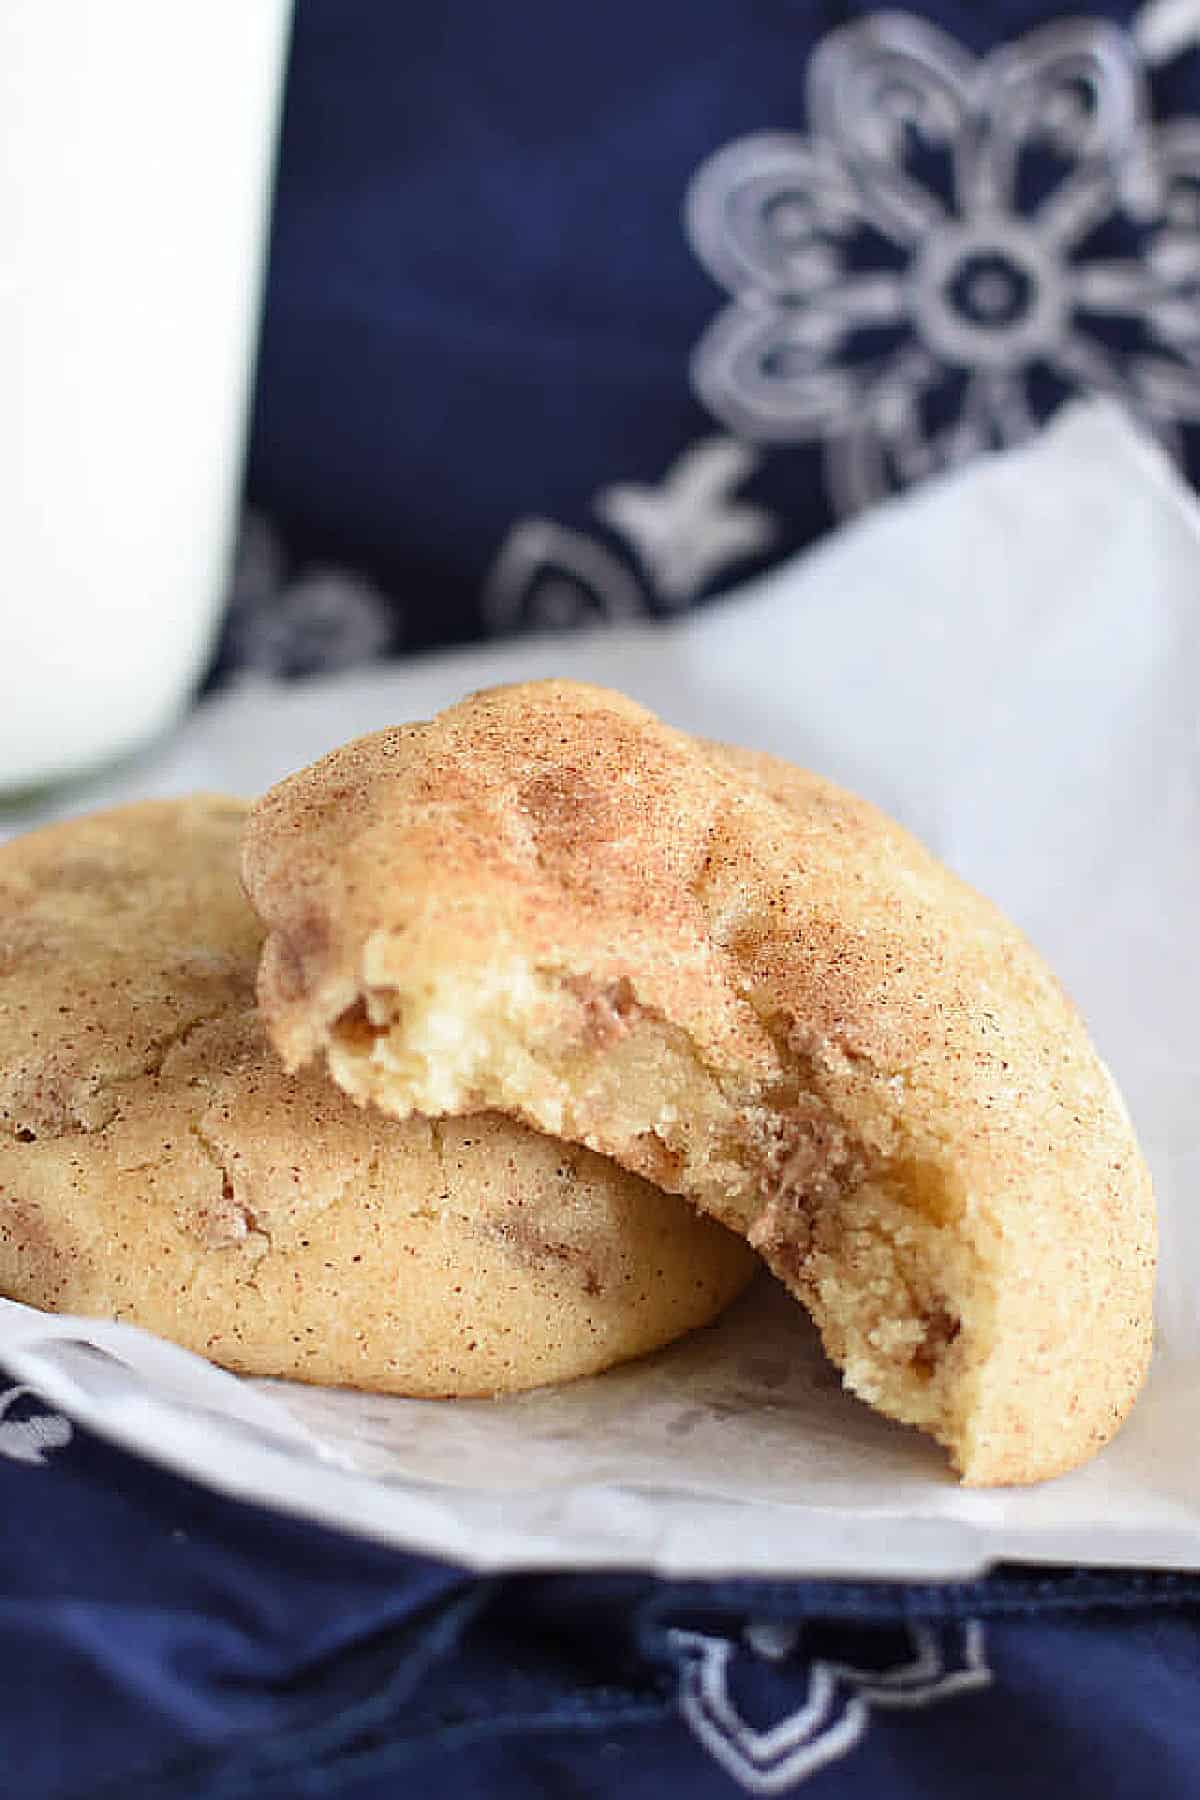 A snickerdoodle cookie with cinnamon chips with a bite taken out of it.